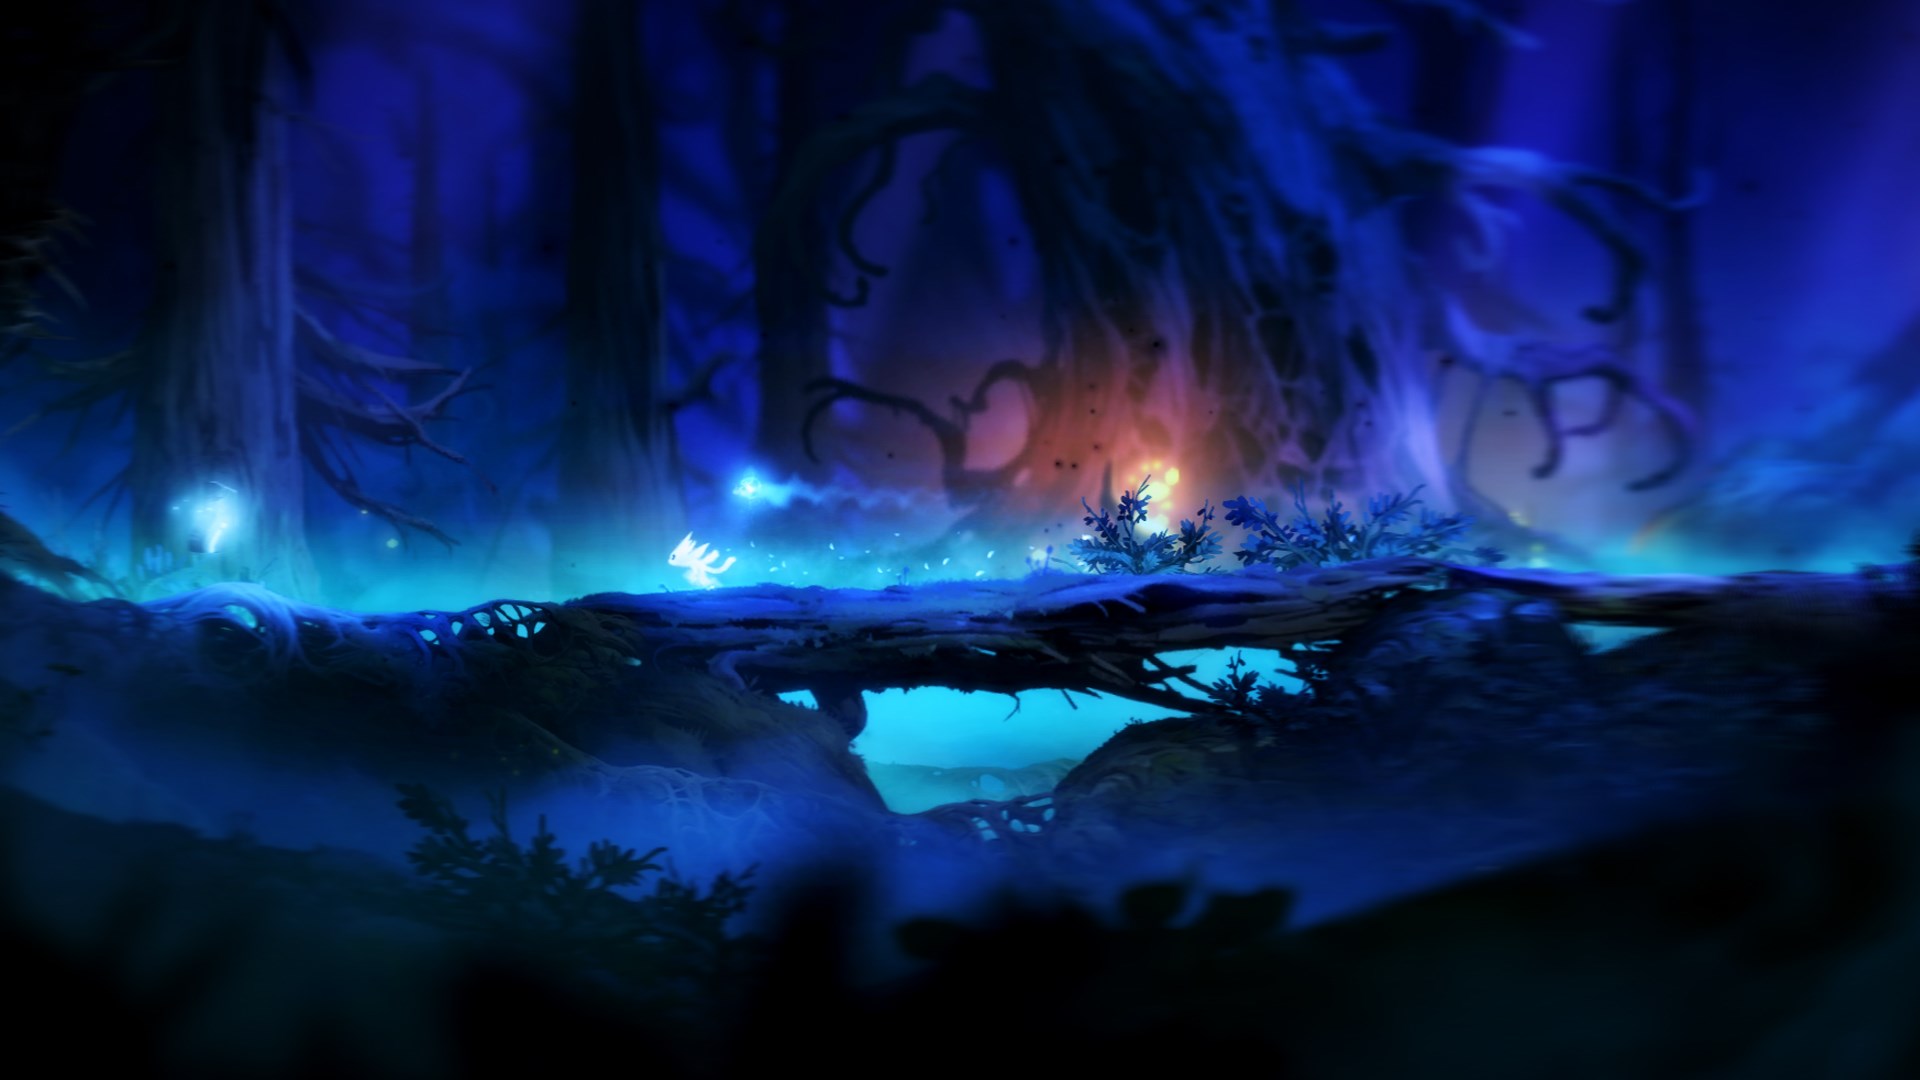 ori and the blind forest xbox store